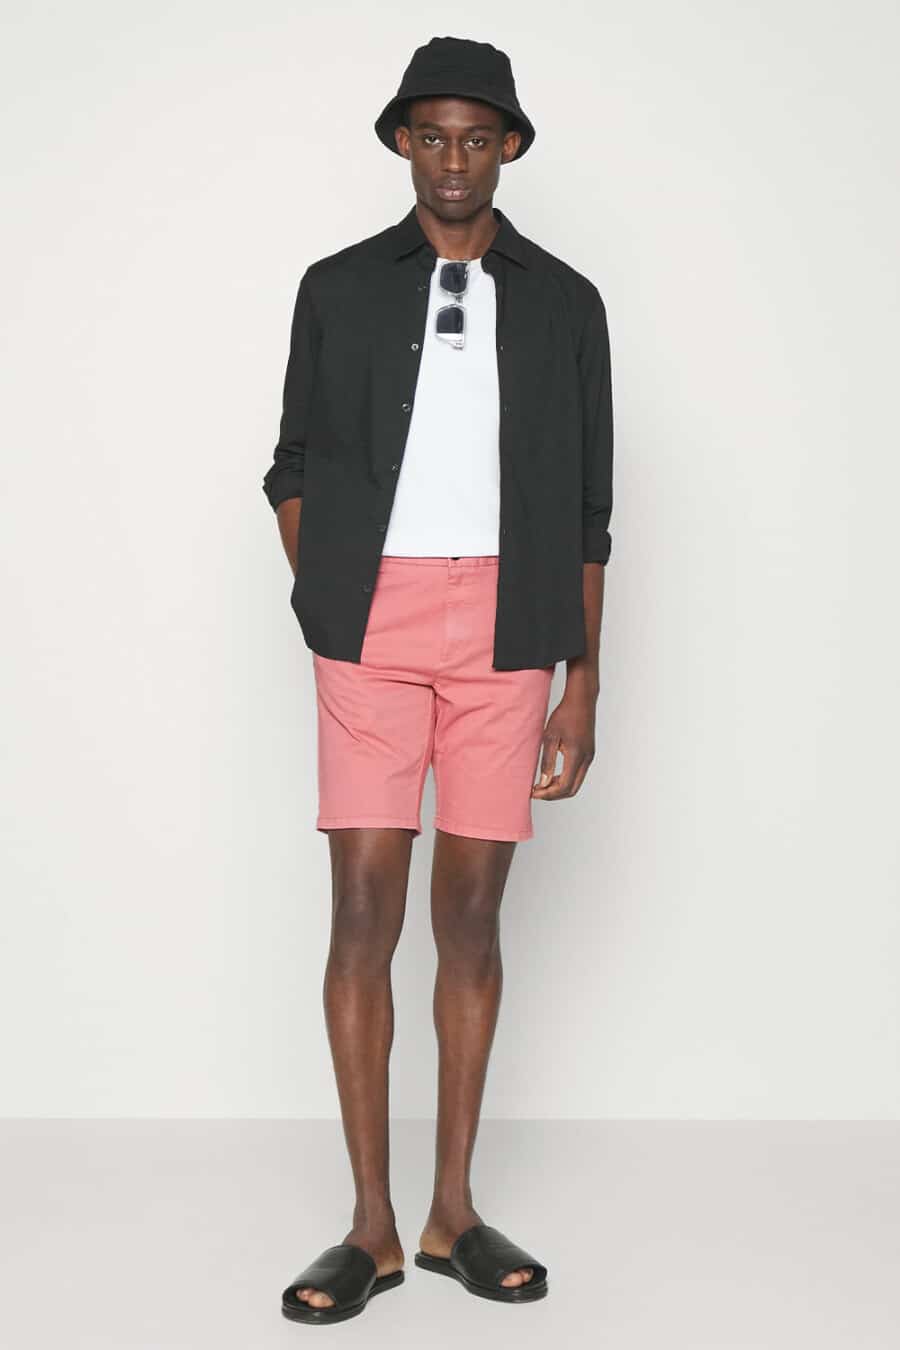 Men's bright pink shorts, white T-shirt, black open shirt, black bucket hat and black leather sliders outfit